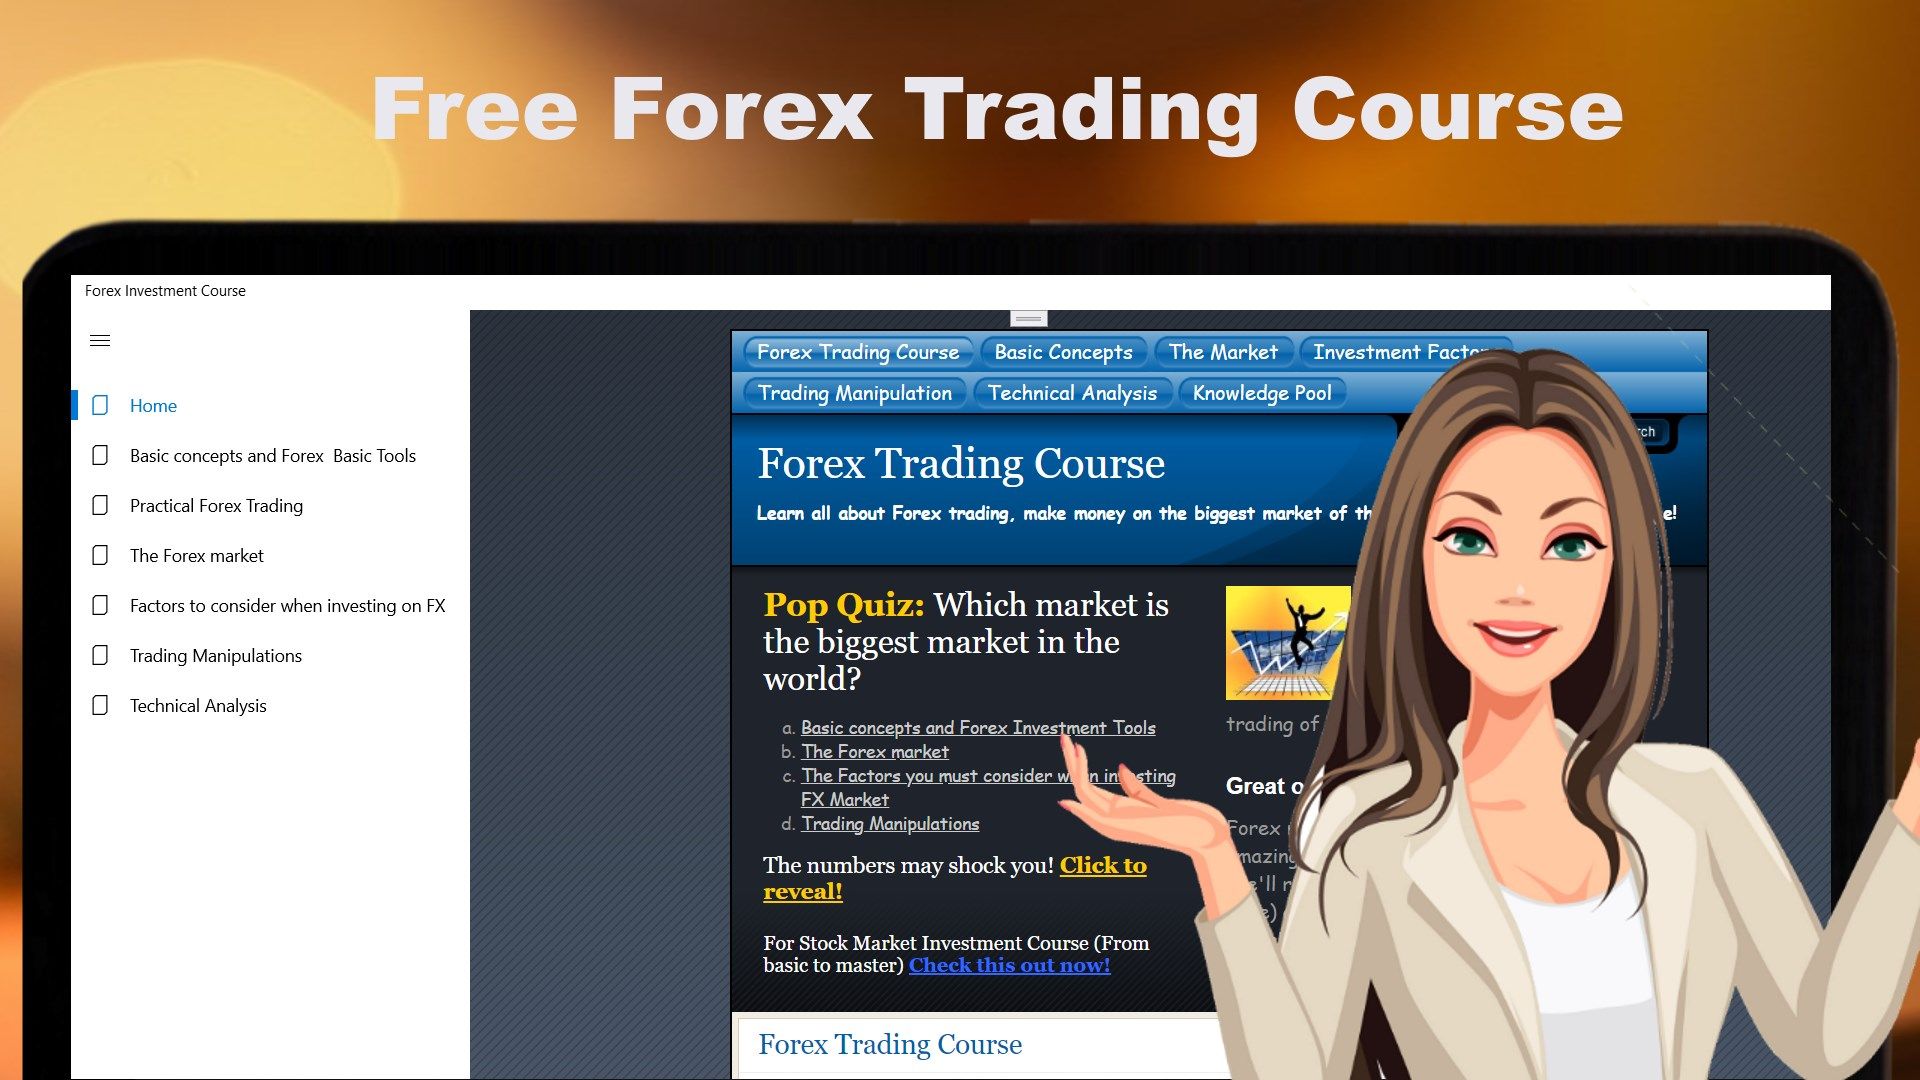 Forex Investment Course